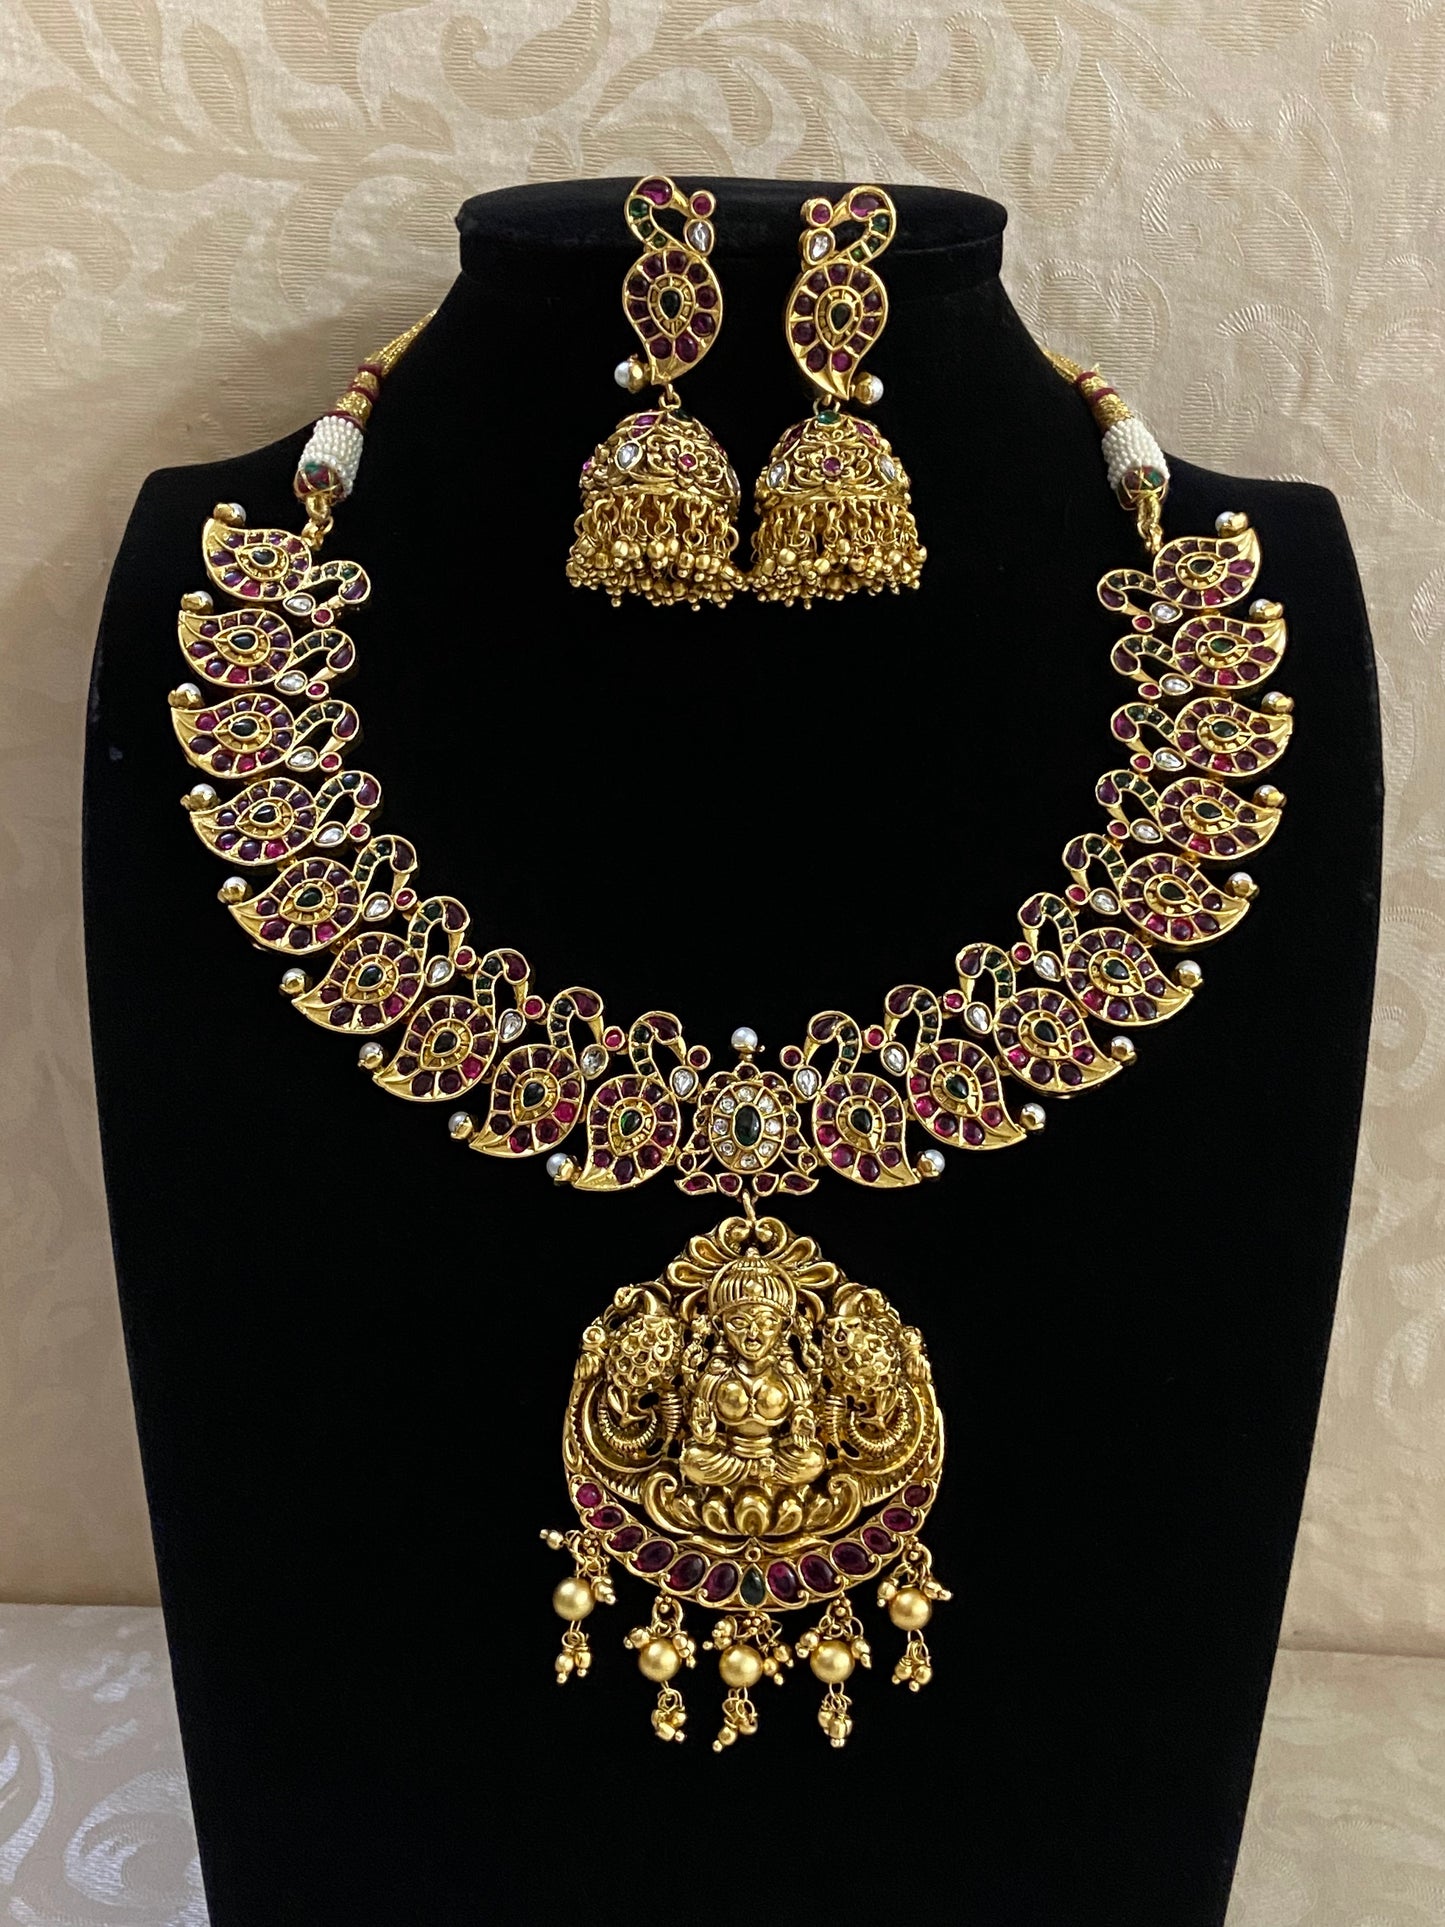 Kemp necklace | South Indian jewelry | traditional necklace